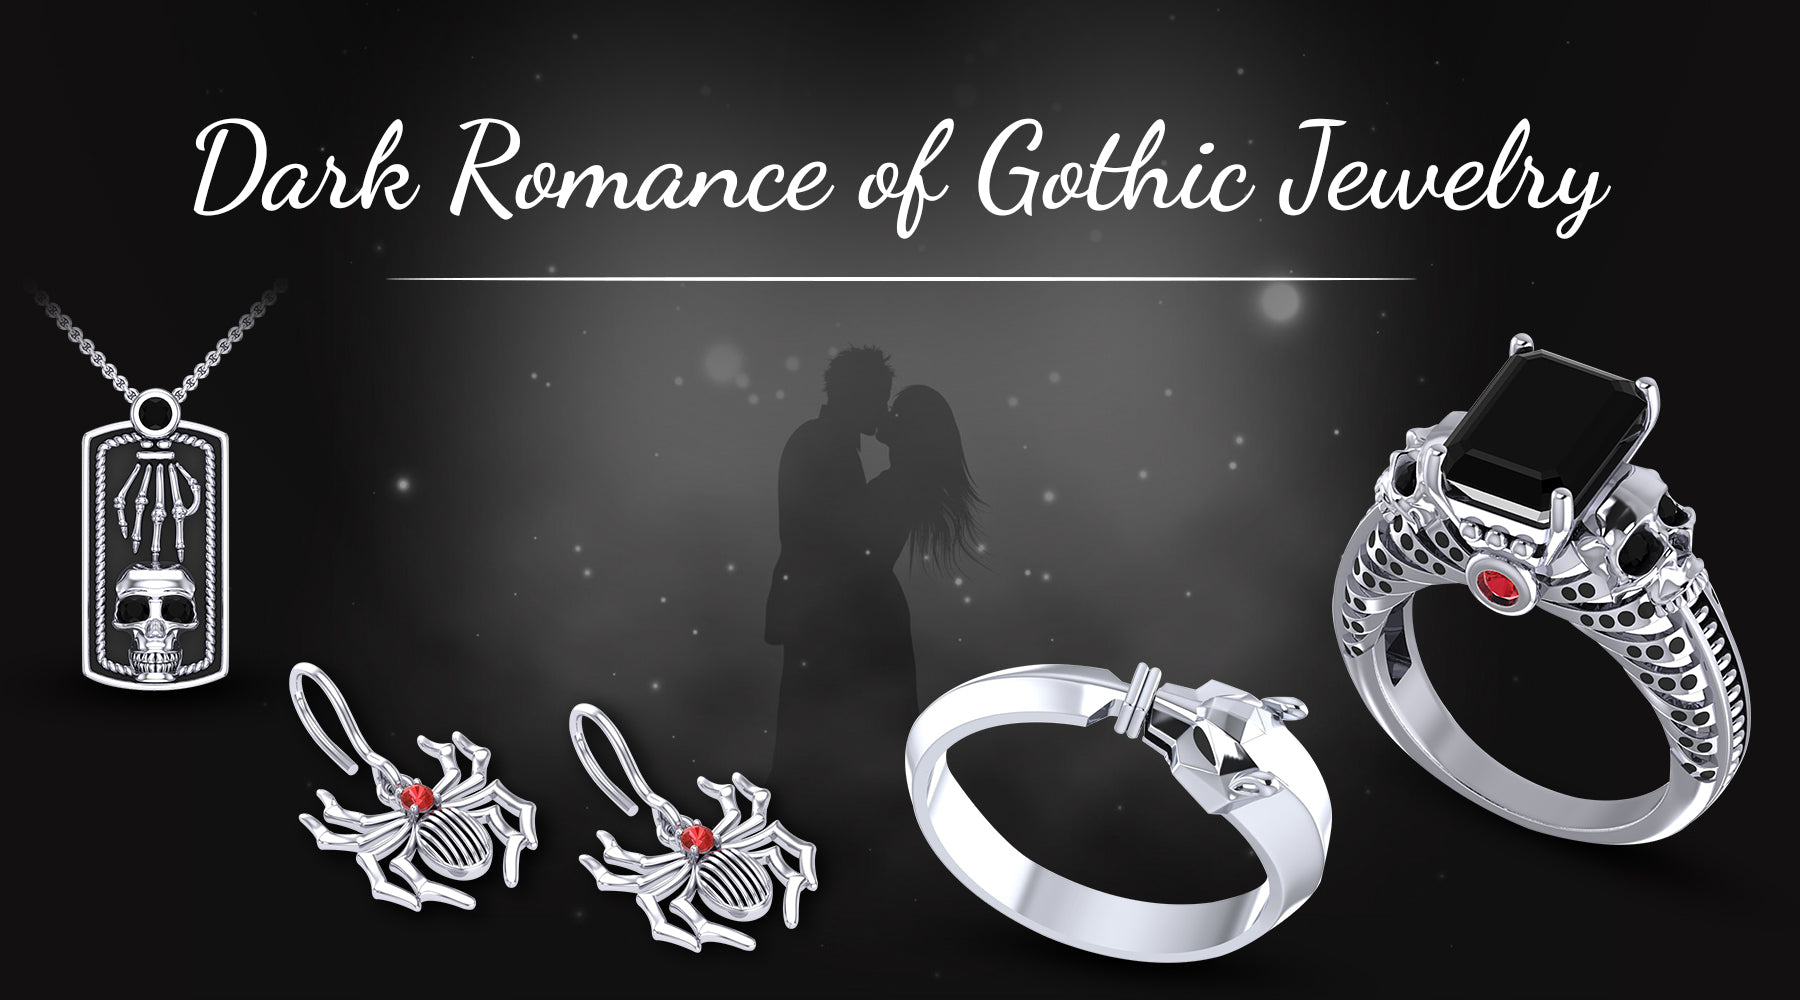 The Gothic Jewelry of Dark Romance Reflects Love and Desire